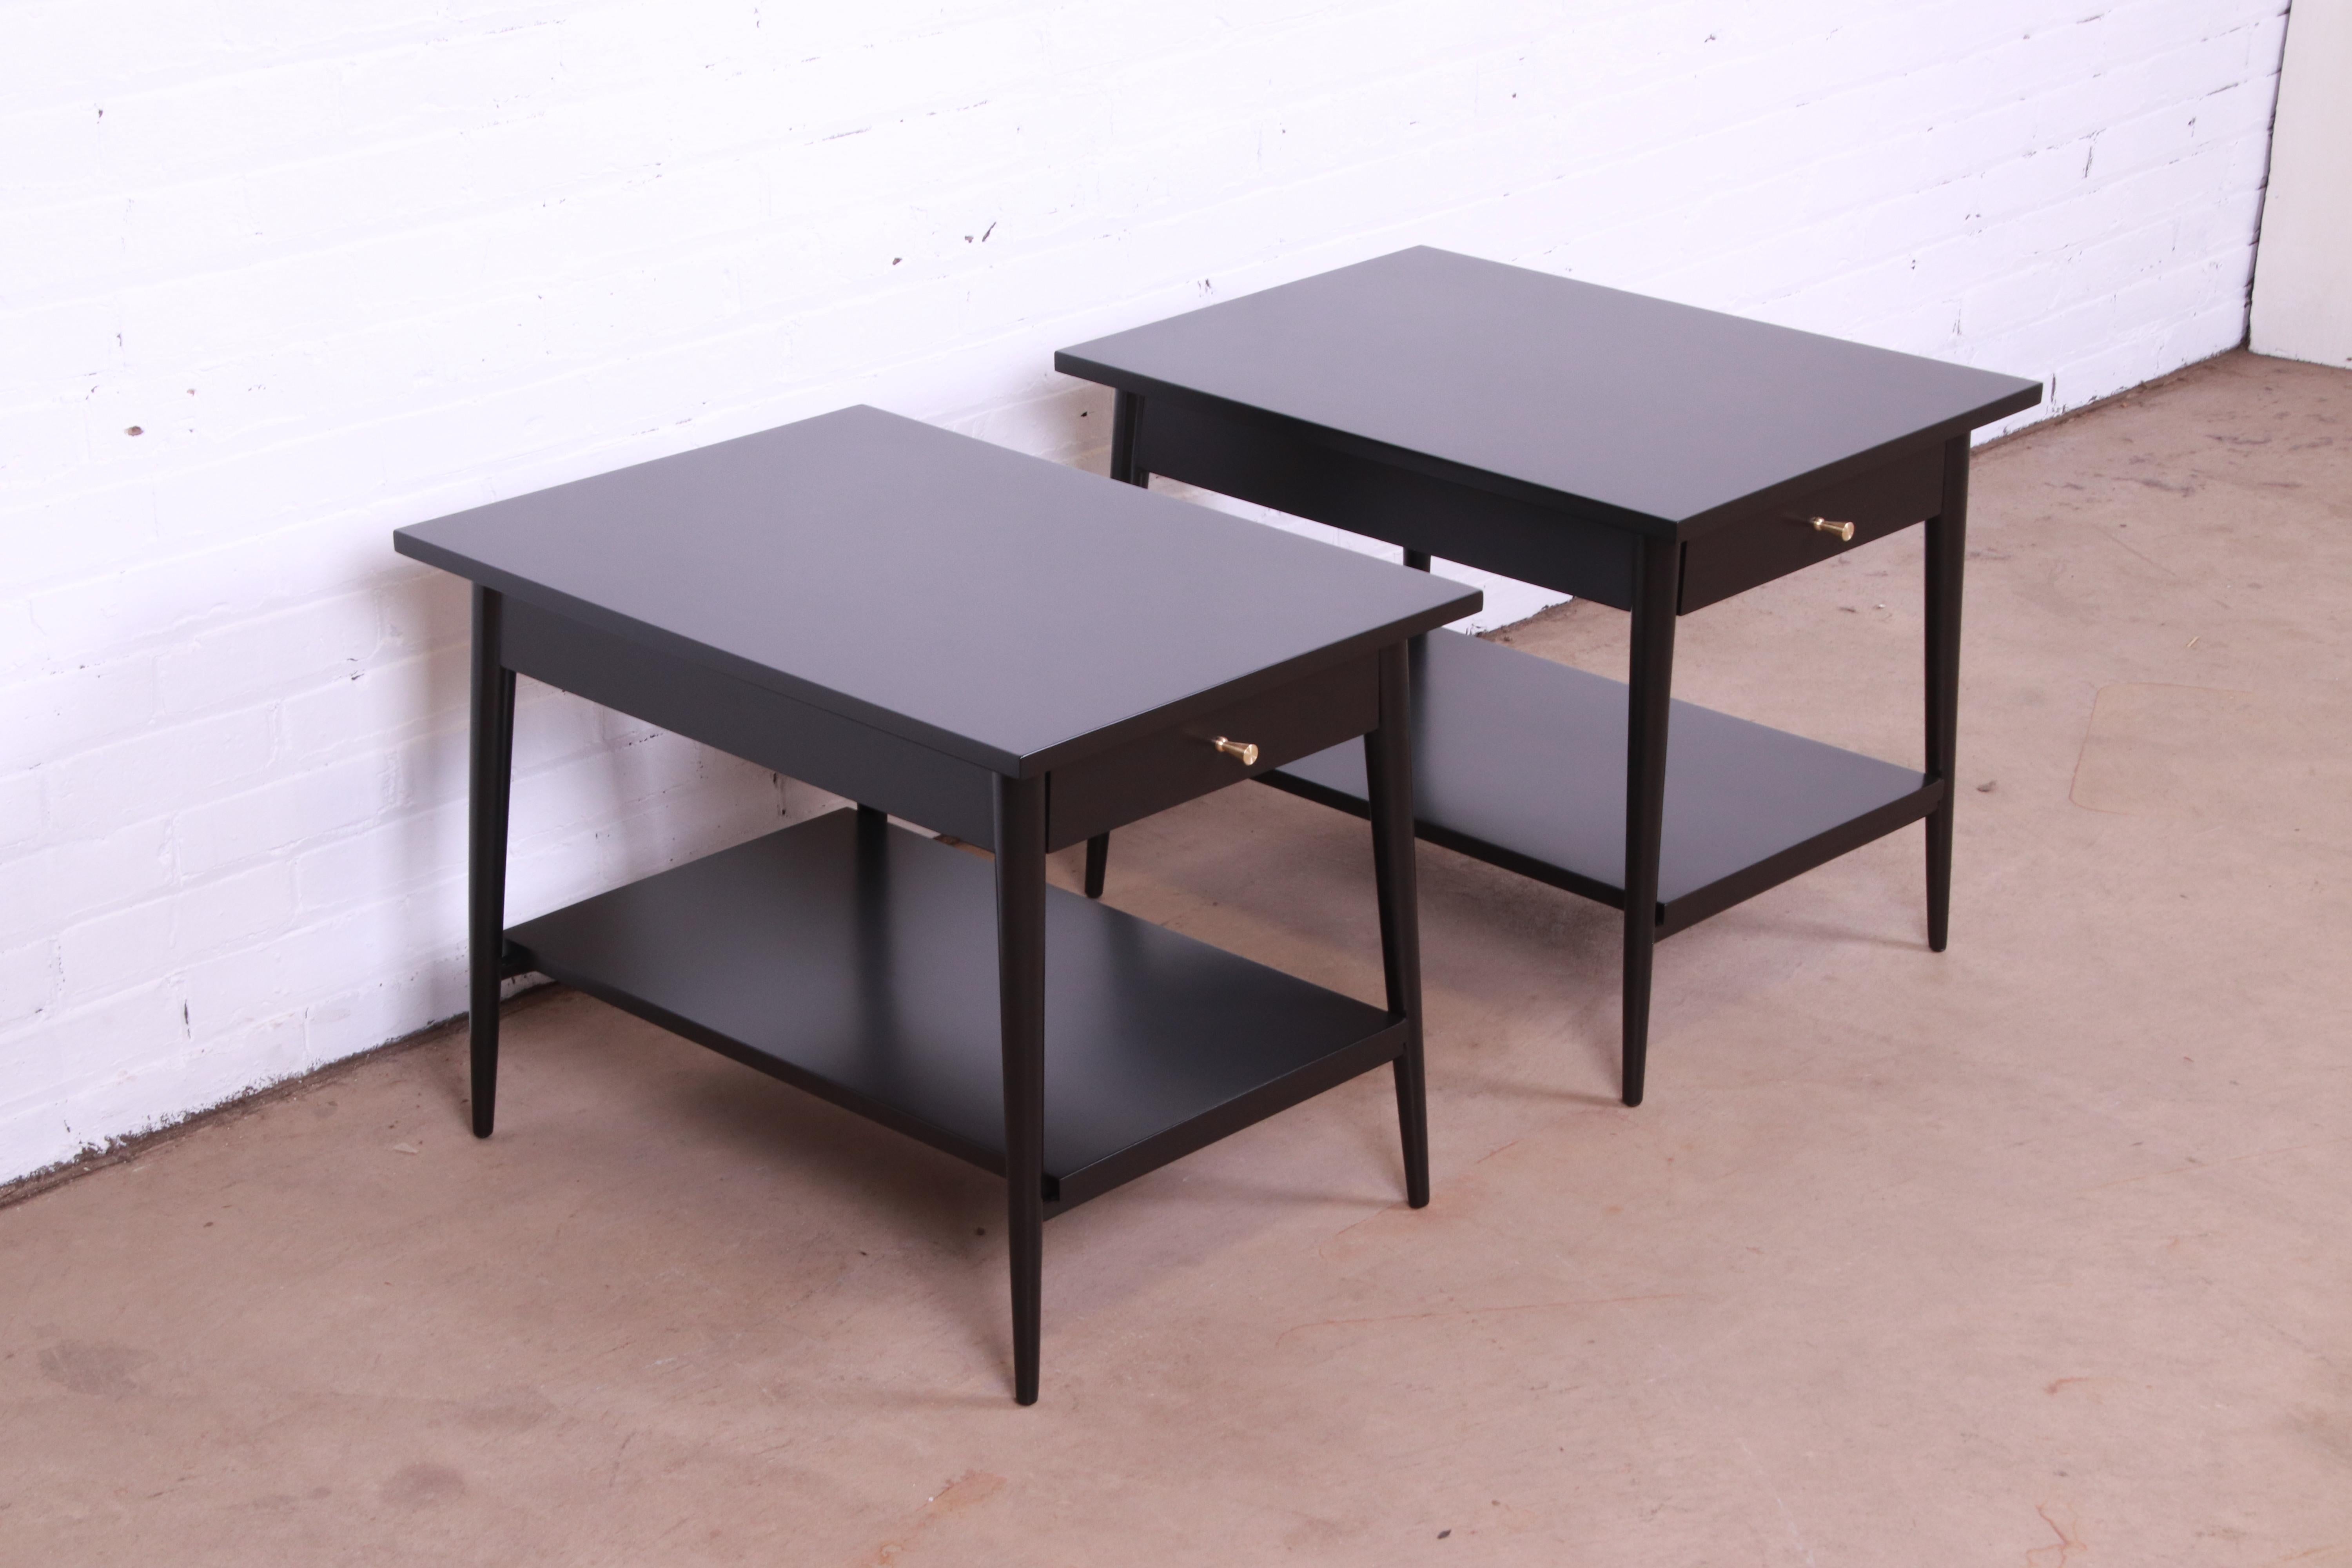 Mid-20th Century Paul McCobb Planner Group Black Lacquered Nightstands, Newly Refinished For Sale